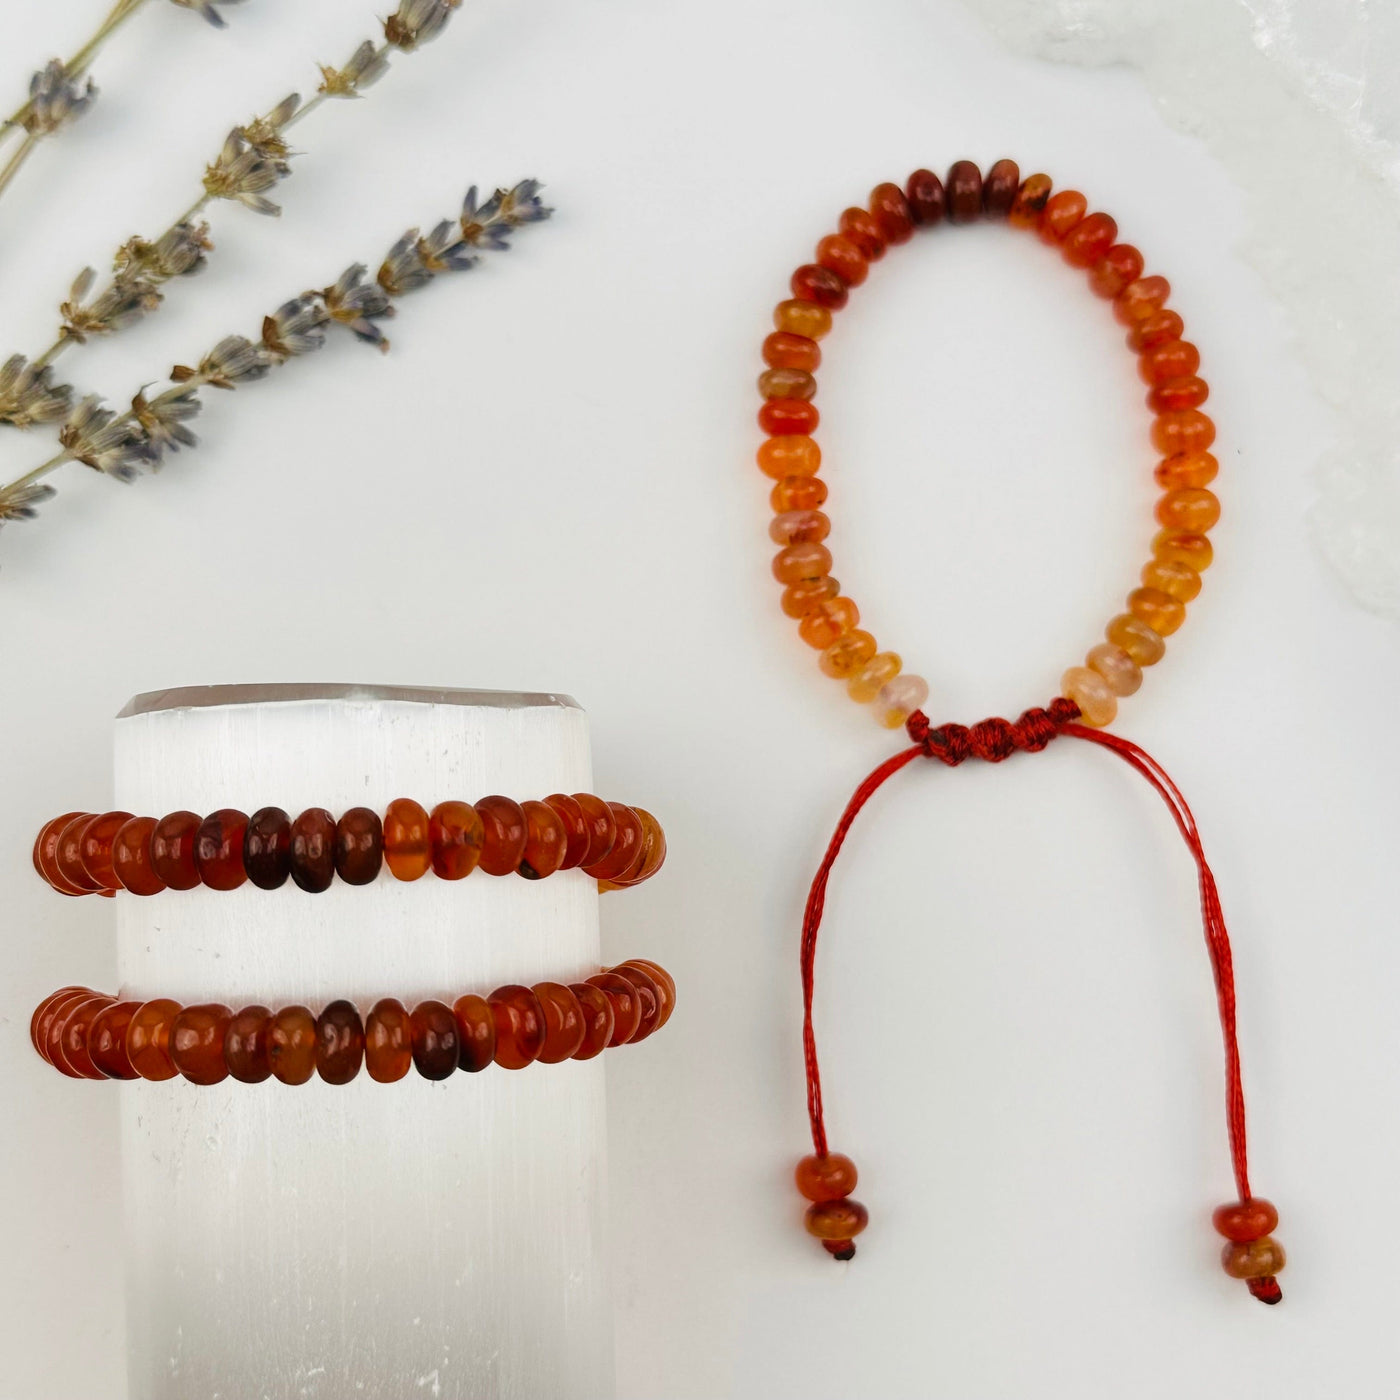 Crystal Carnelian Rondelle Bracelets displayed to show the differences in the color shades 